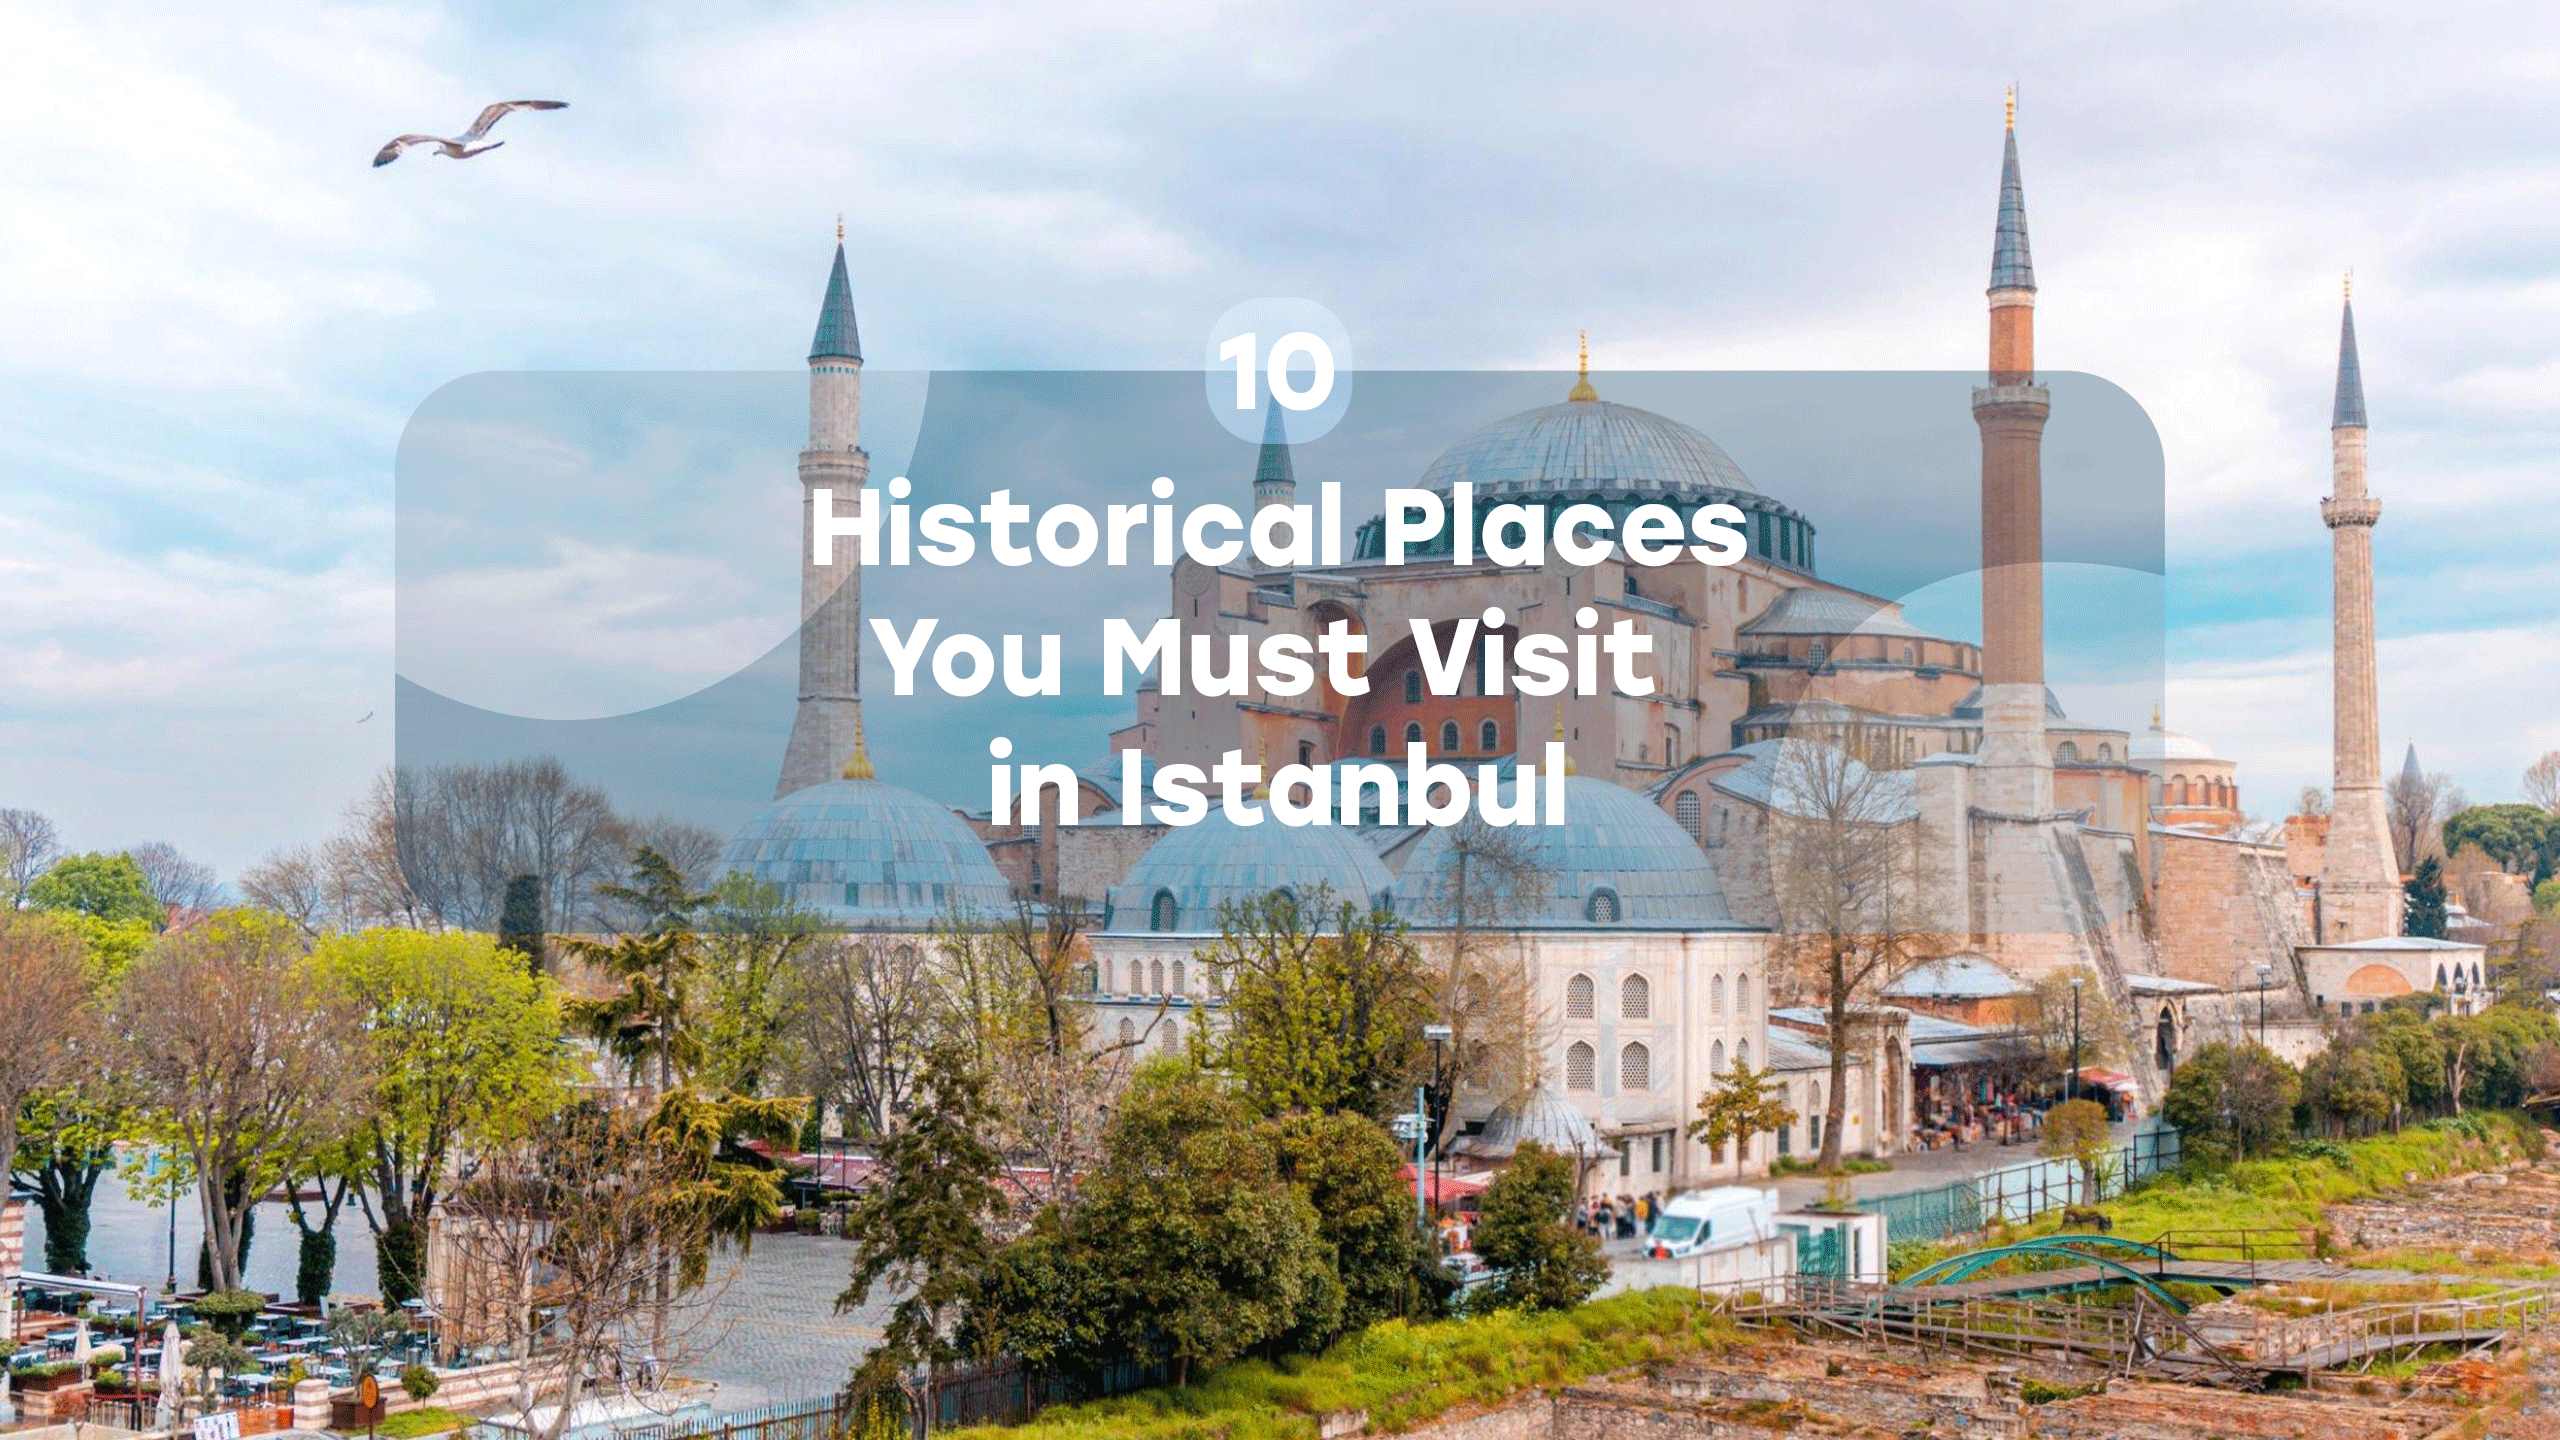 10 Historical Places You Must Visit in Istanbul Everytours